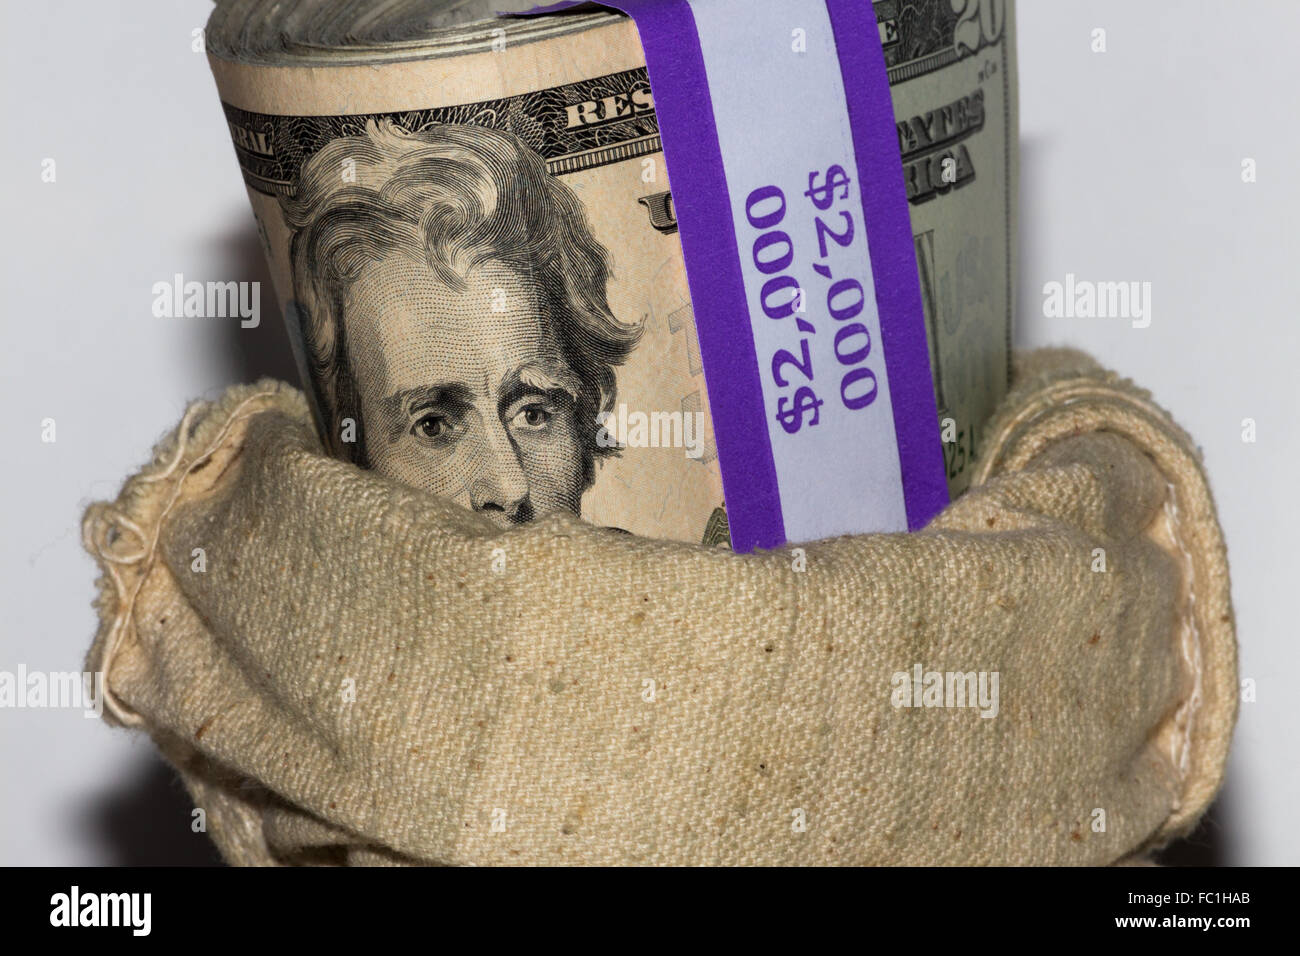 money in a bag Stock Photo